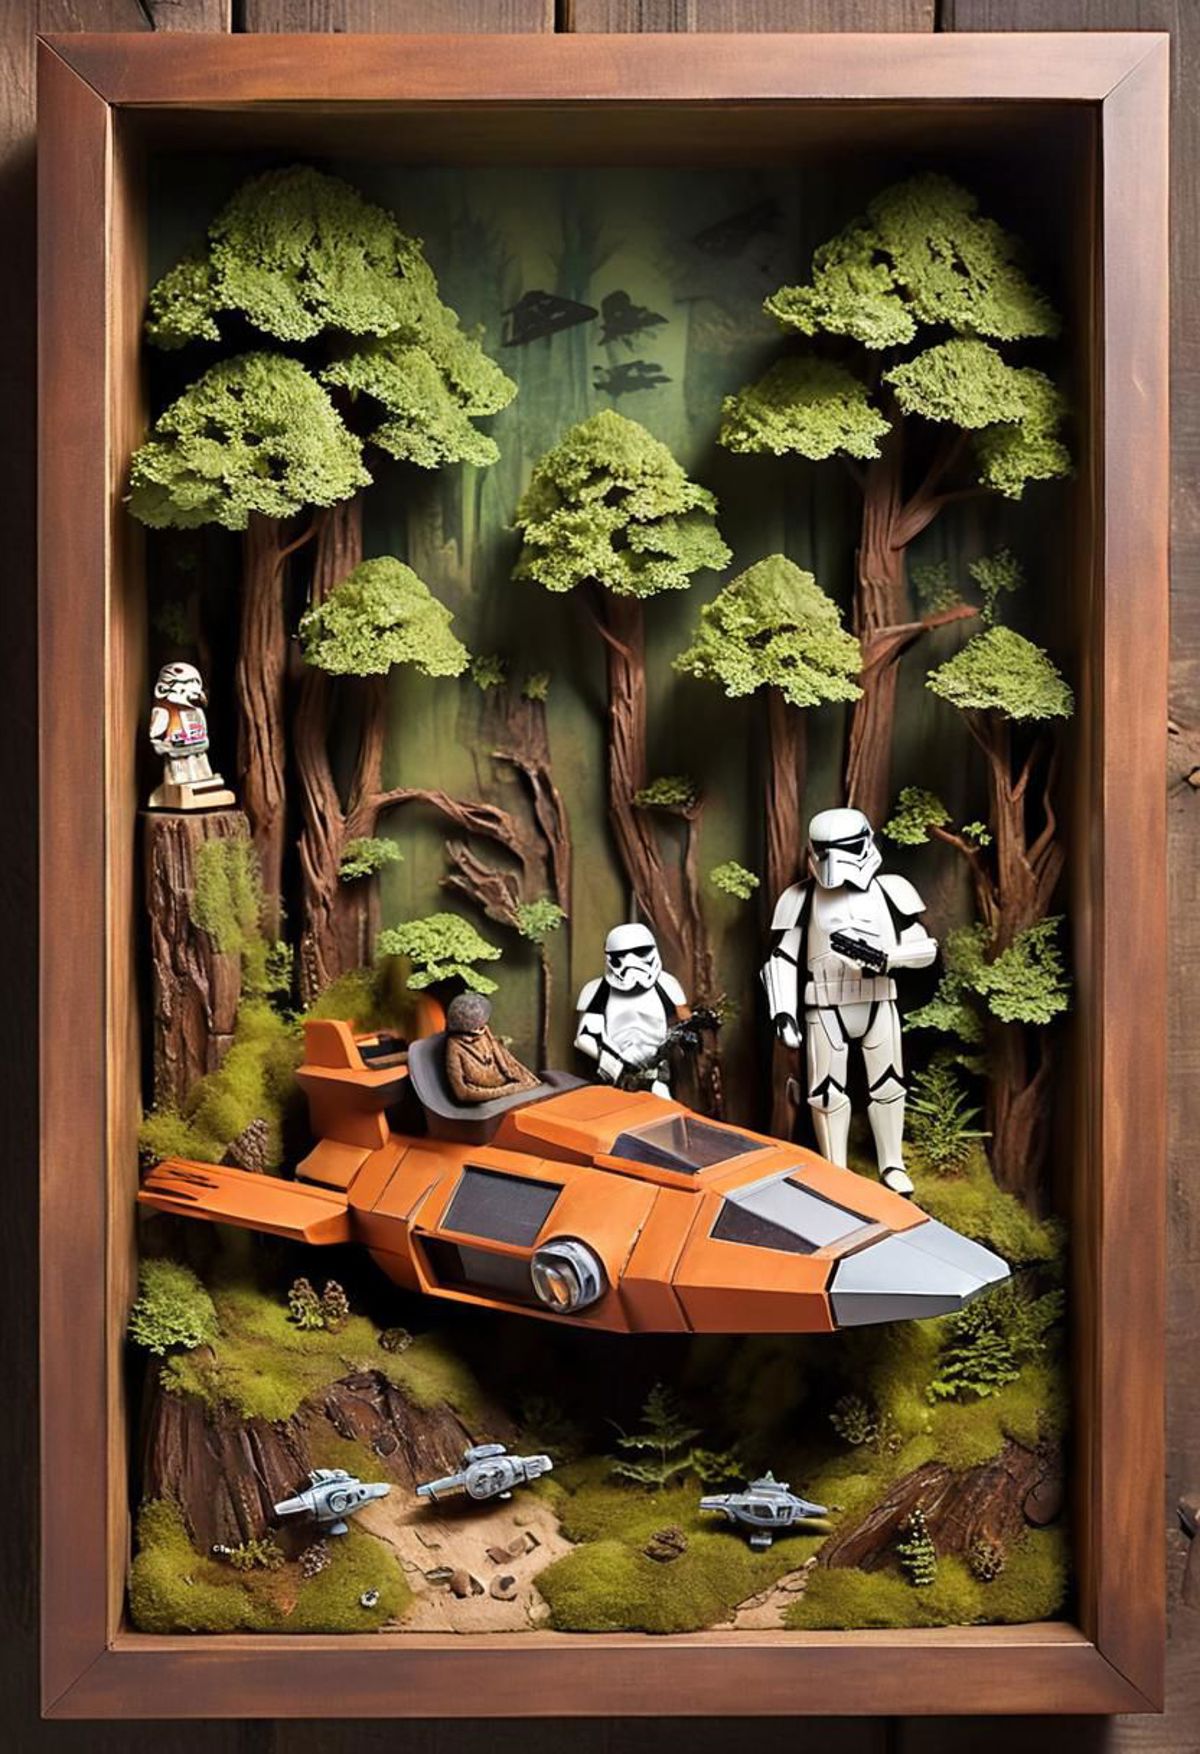 Wooden box display with a Star Wars theme featuring a spaceship and action figures.